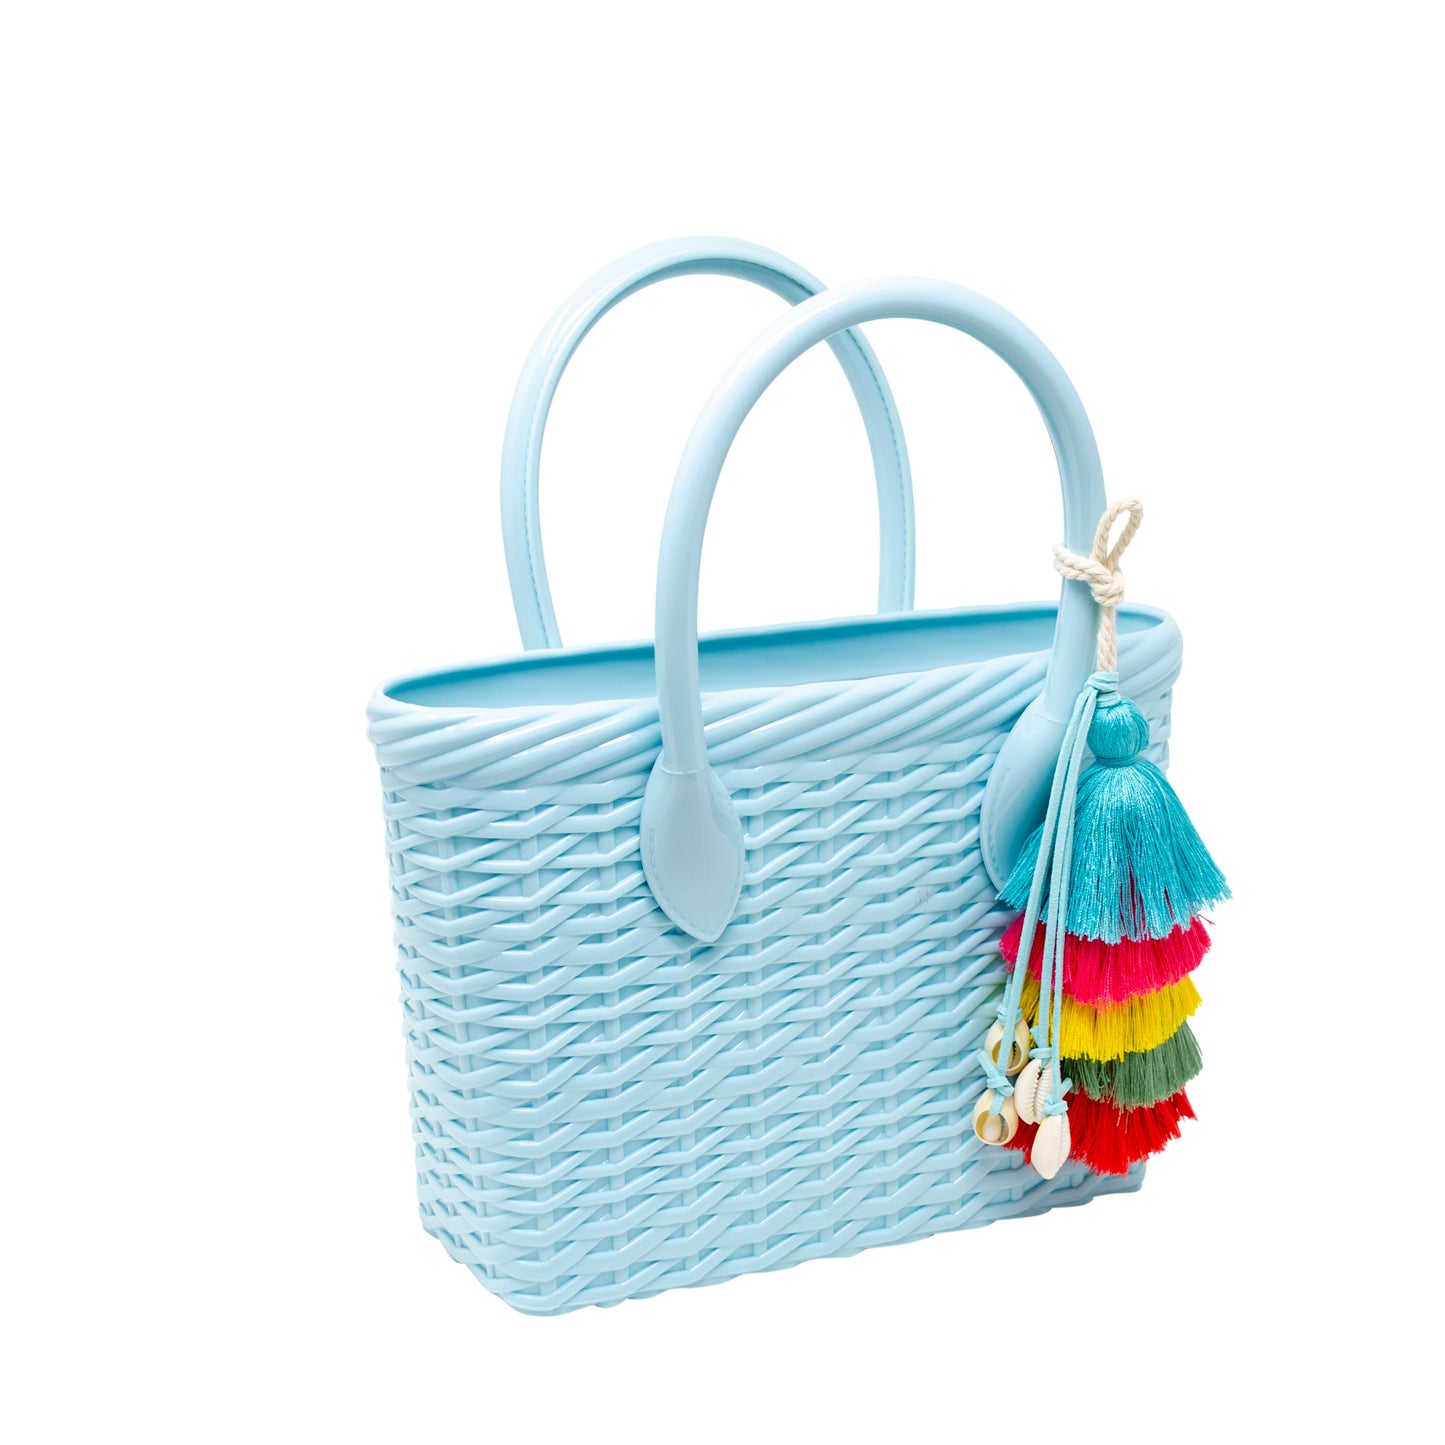 Girl's Tiny Jelly Weave Tote Bag